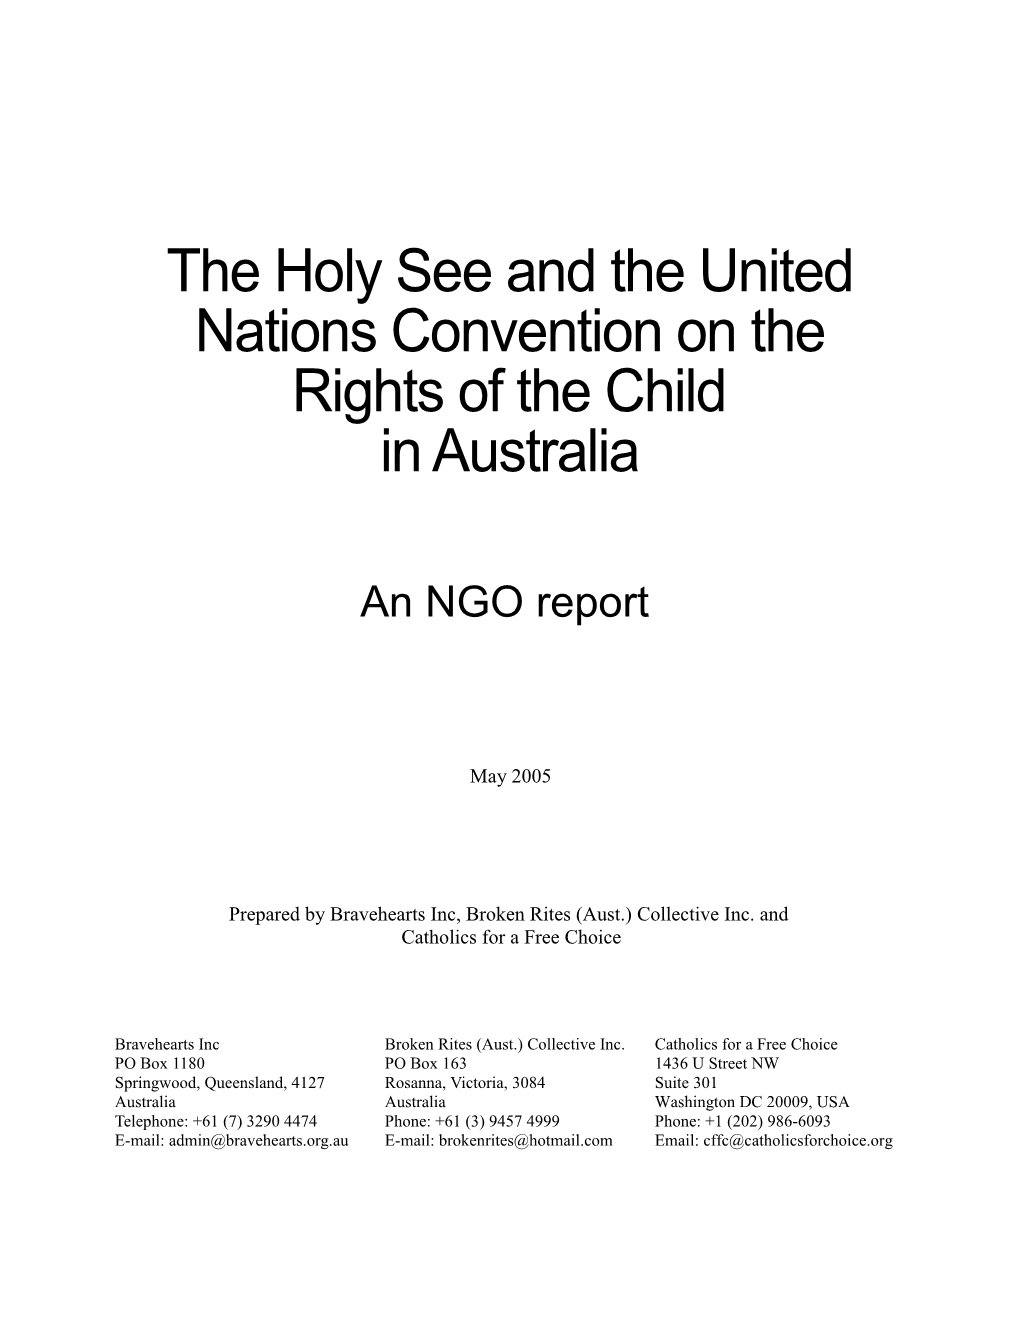 The Holy See and the United Nations Convention on the Rights of the Child